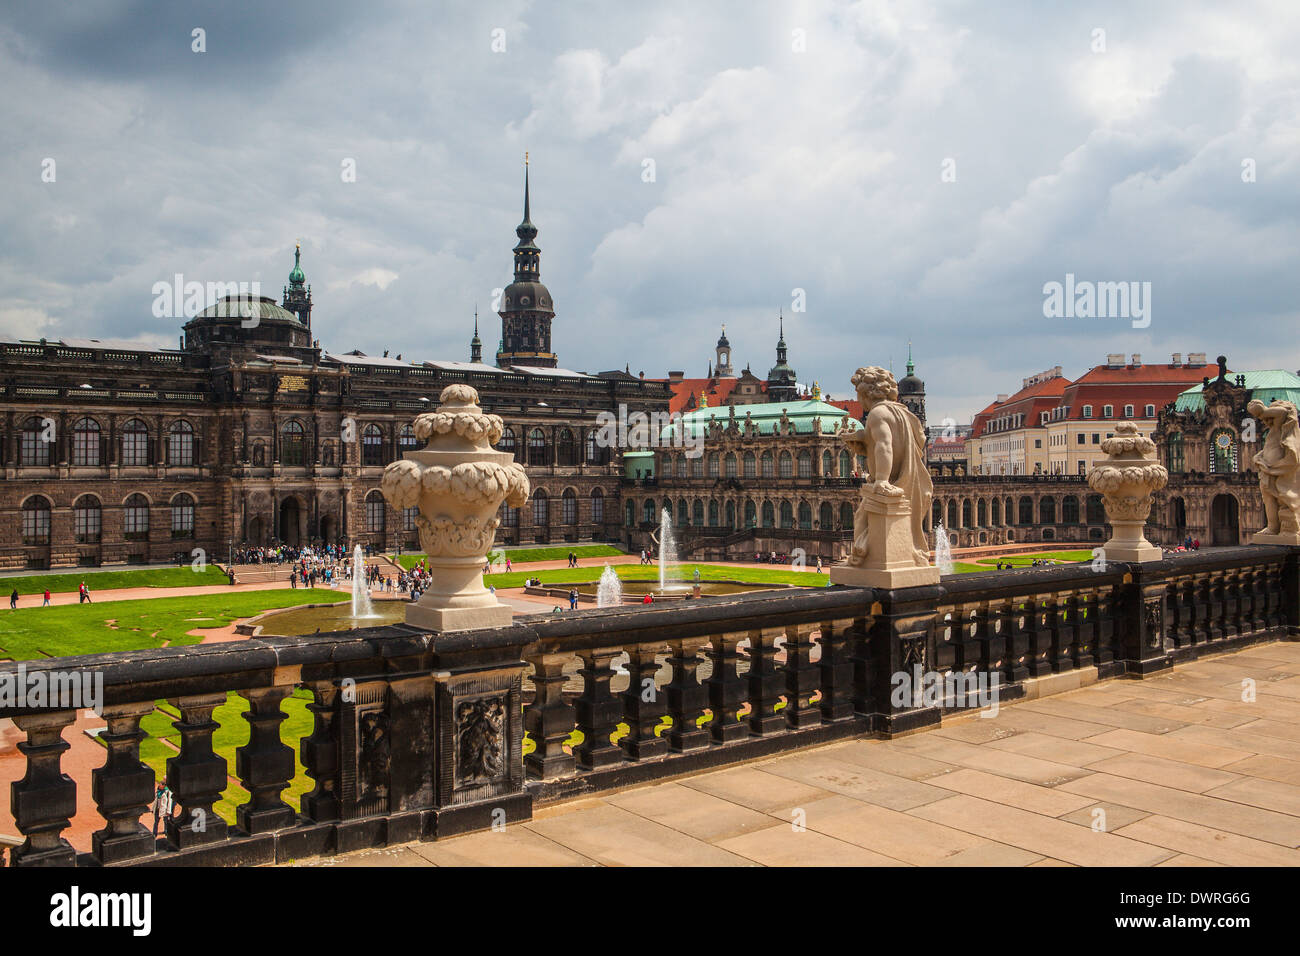 Zwinger Palace, royal palace since 17th century on September 7,2013 in Dresden, Germany. Stock Photo